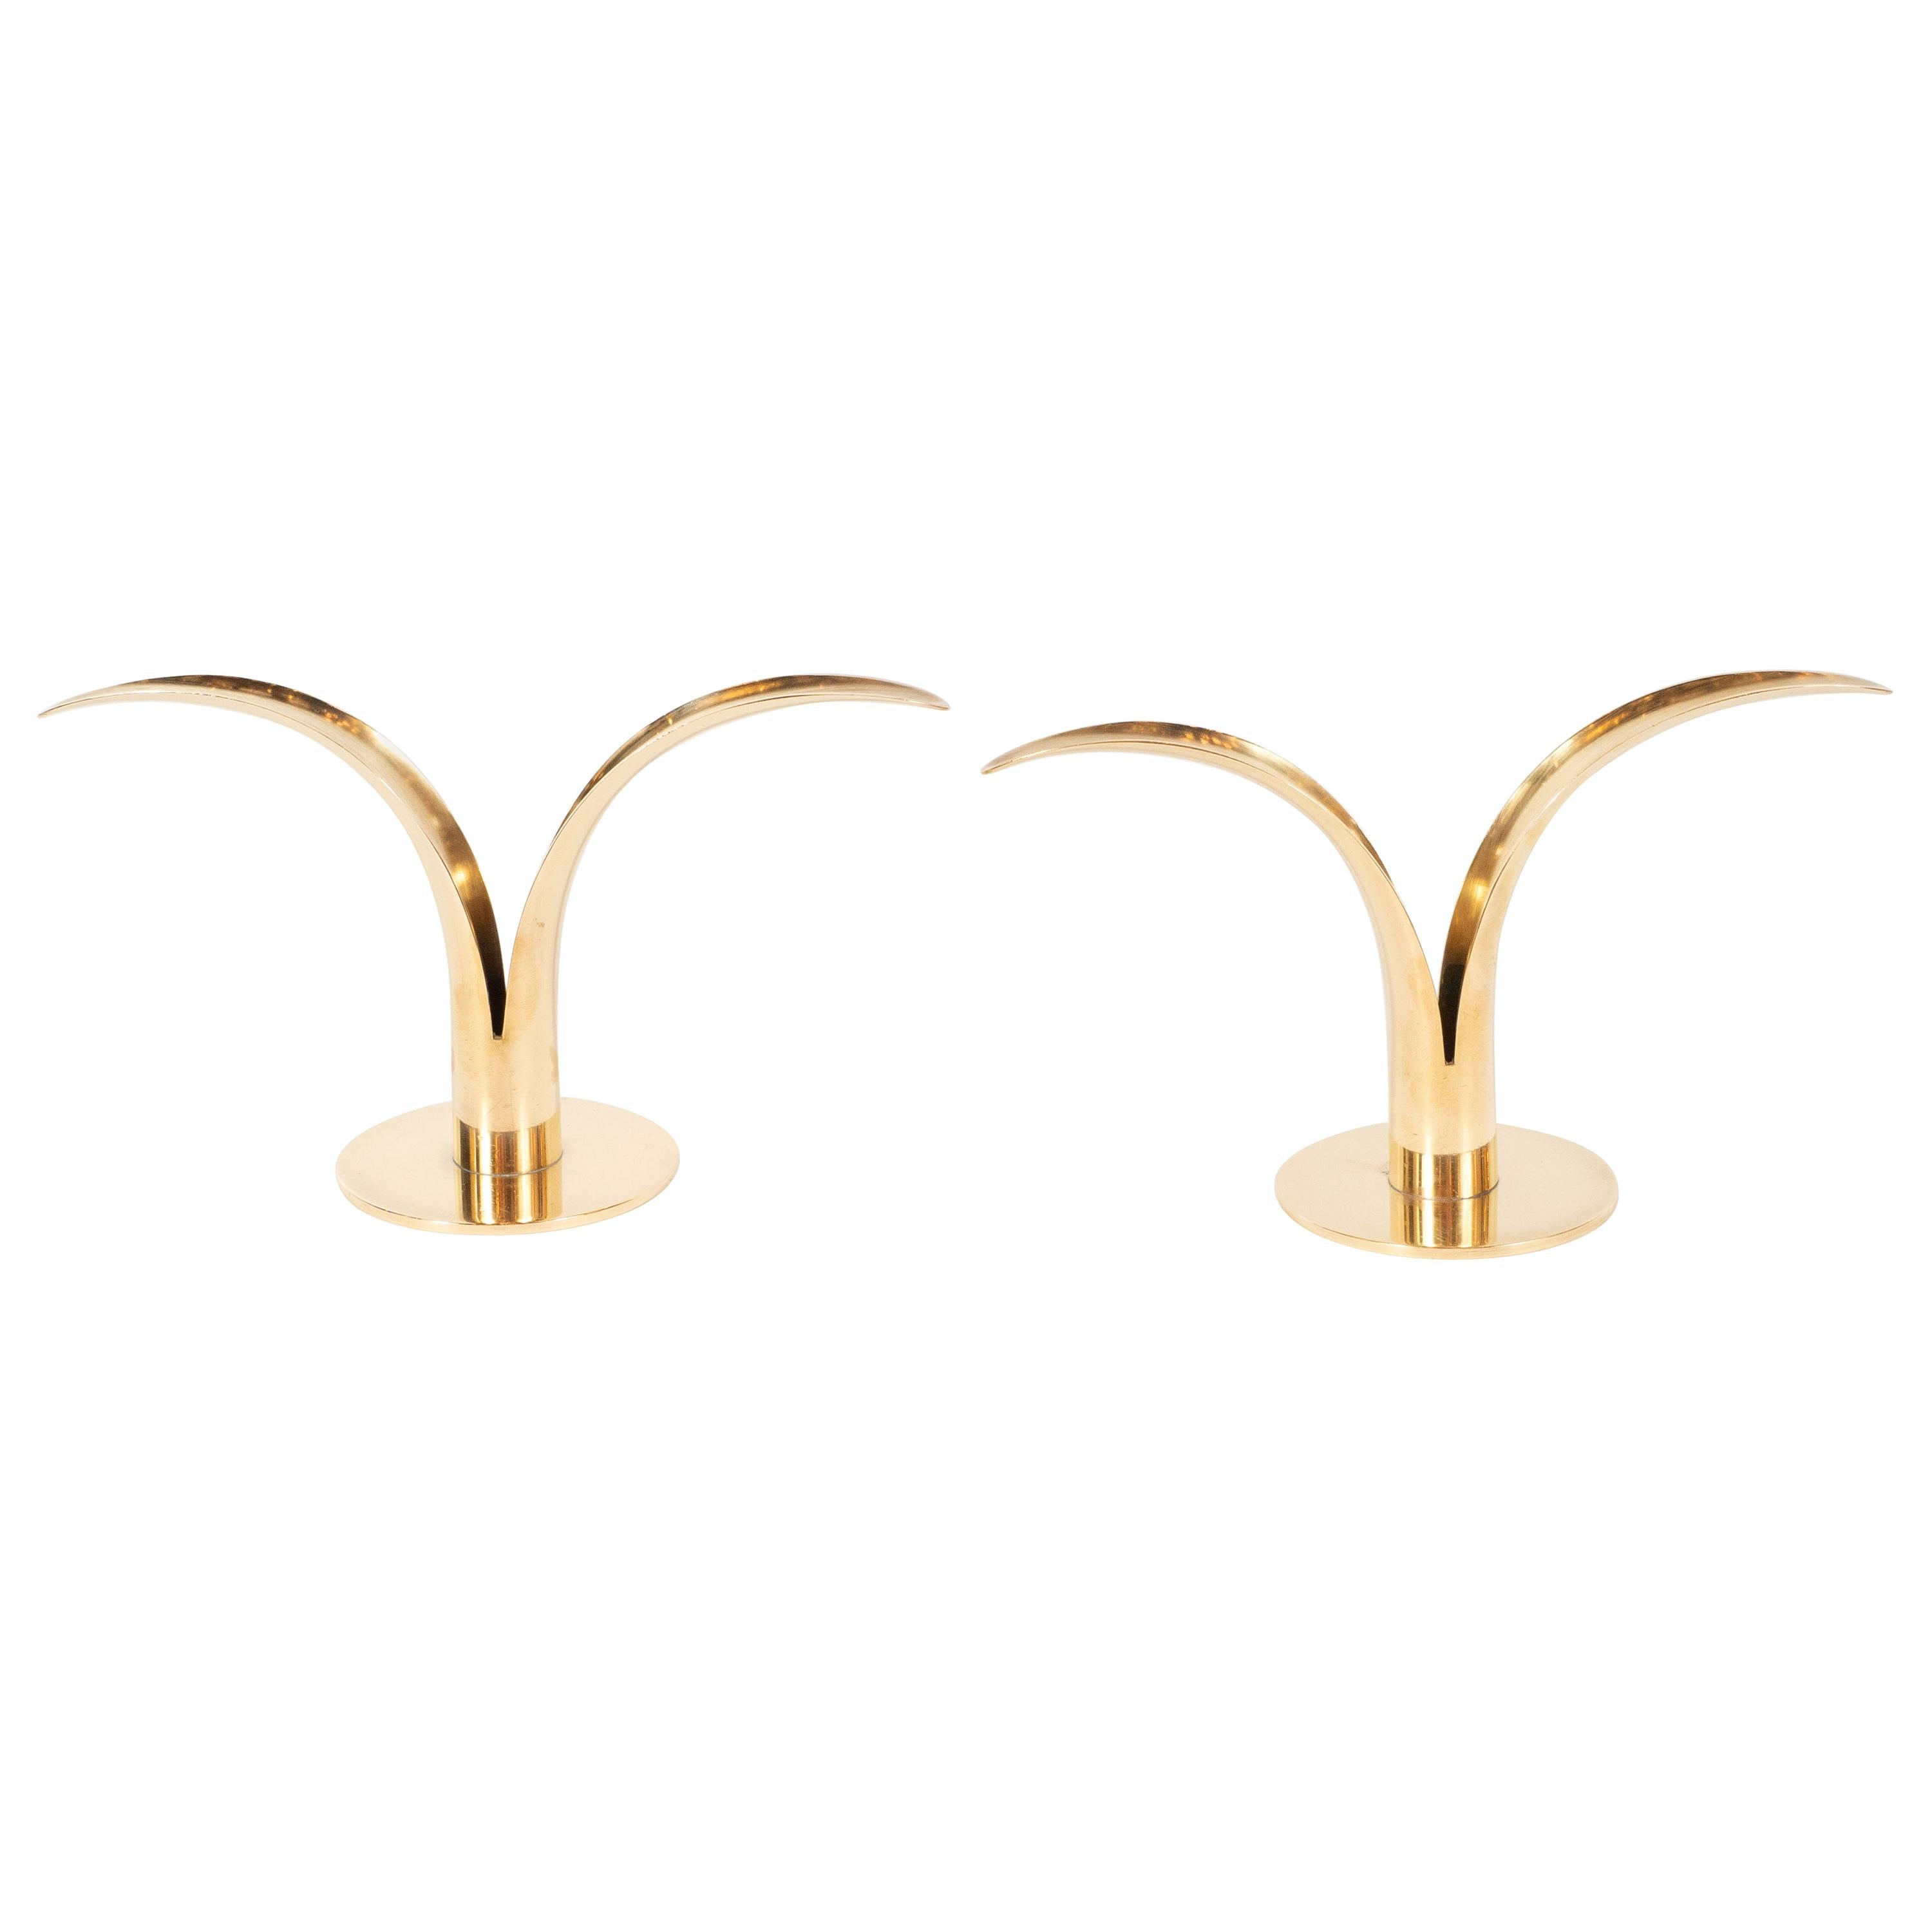 Pair of Mid-Century Modern Polished Brass Lily Candleholders by Konst of Sweden For Sale